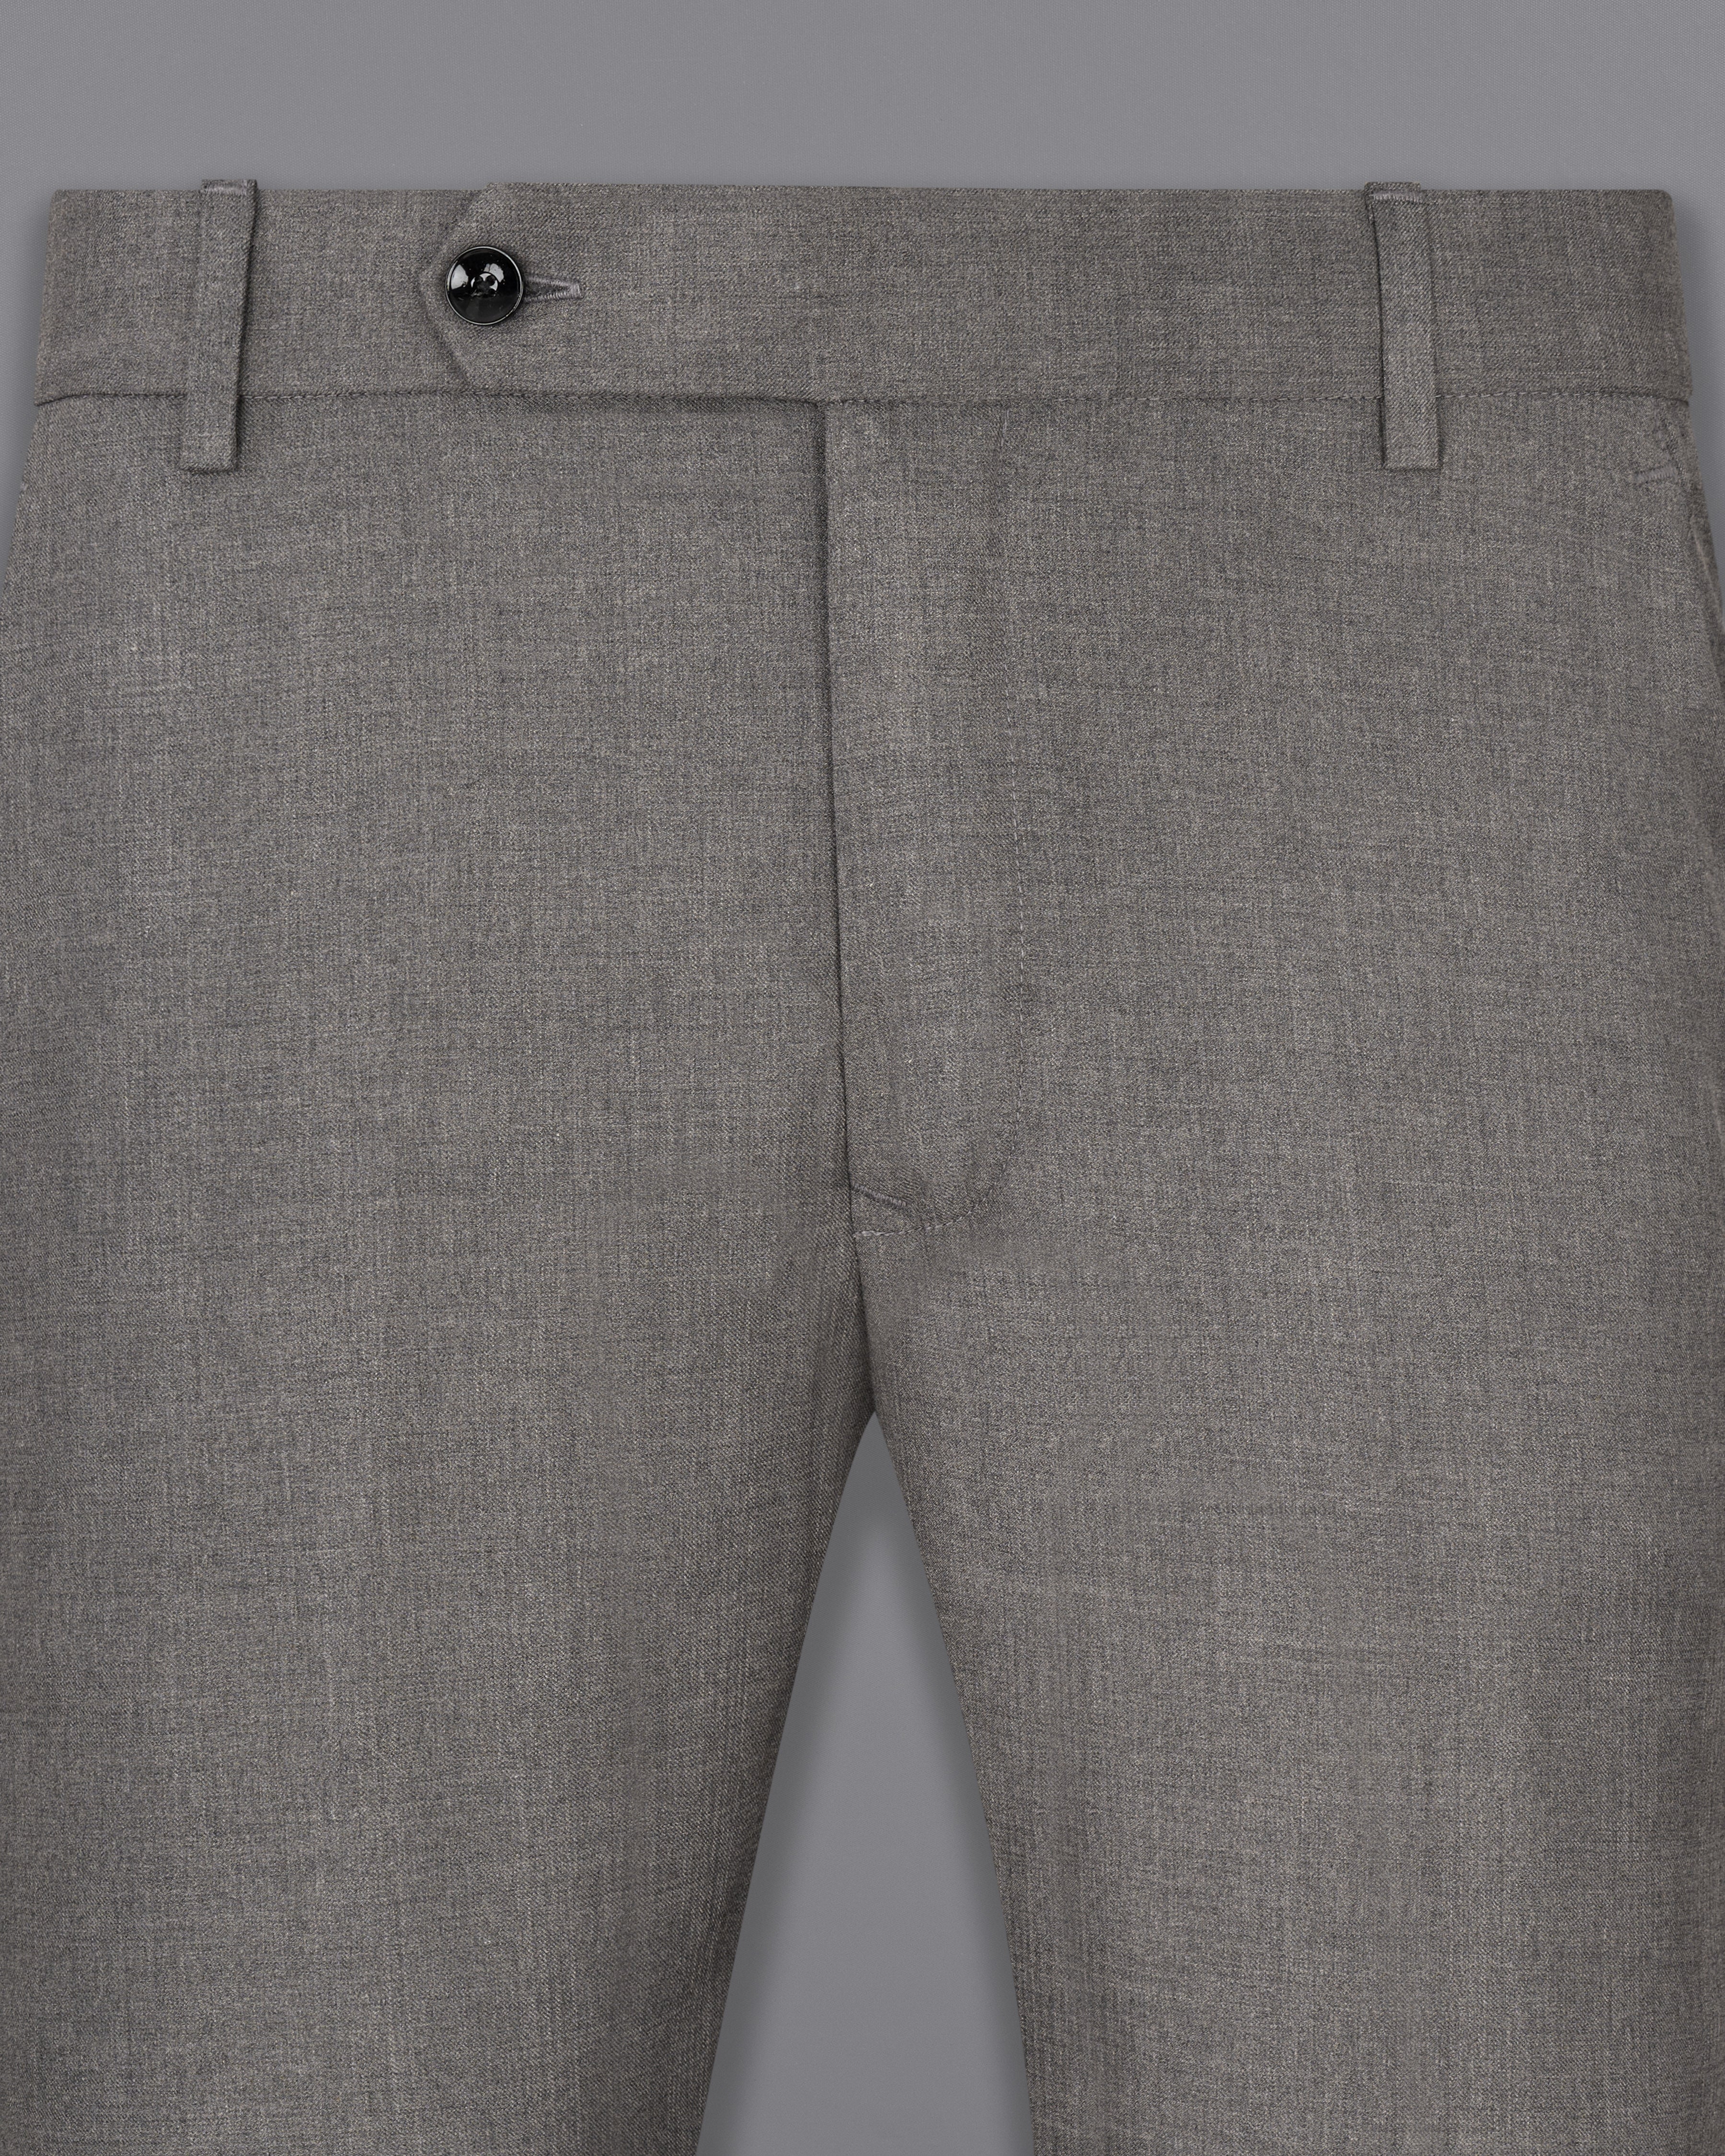 Chicago Gray Textured Pant T2315-28, T2315-30, T2315-32, T2315-34, T2315-36, T2315-38, T2315-40, T2315-42, T2315-44